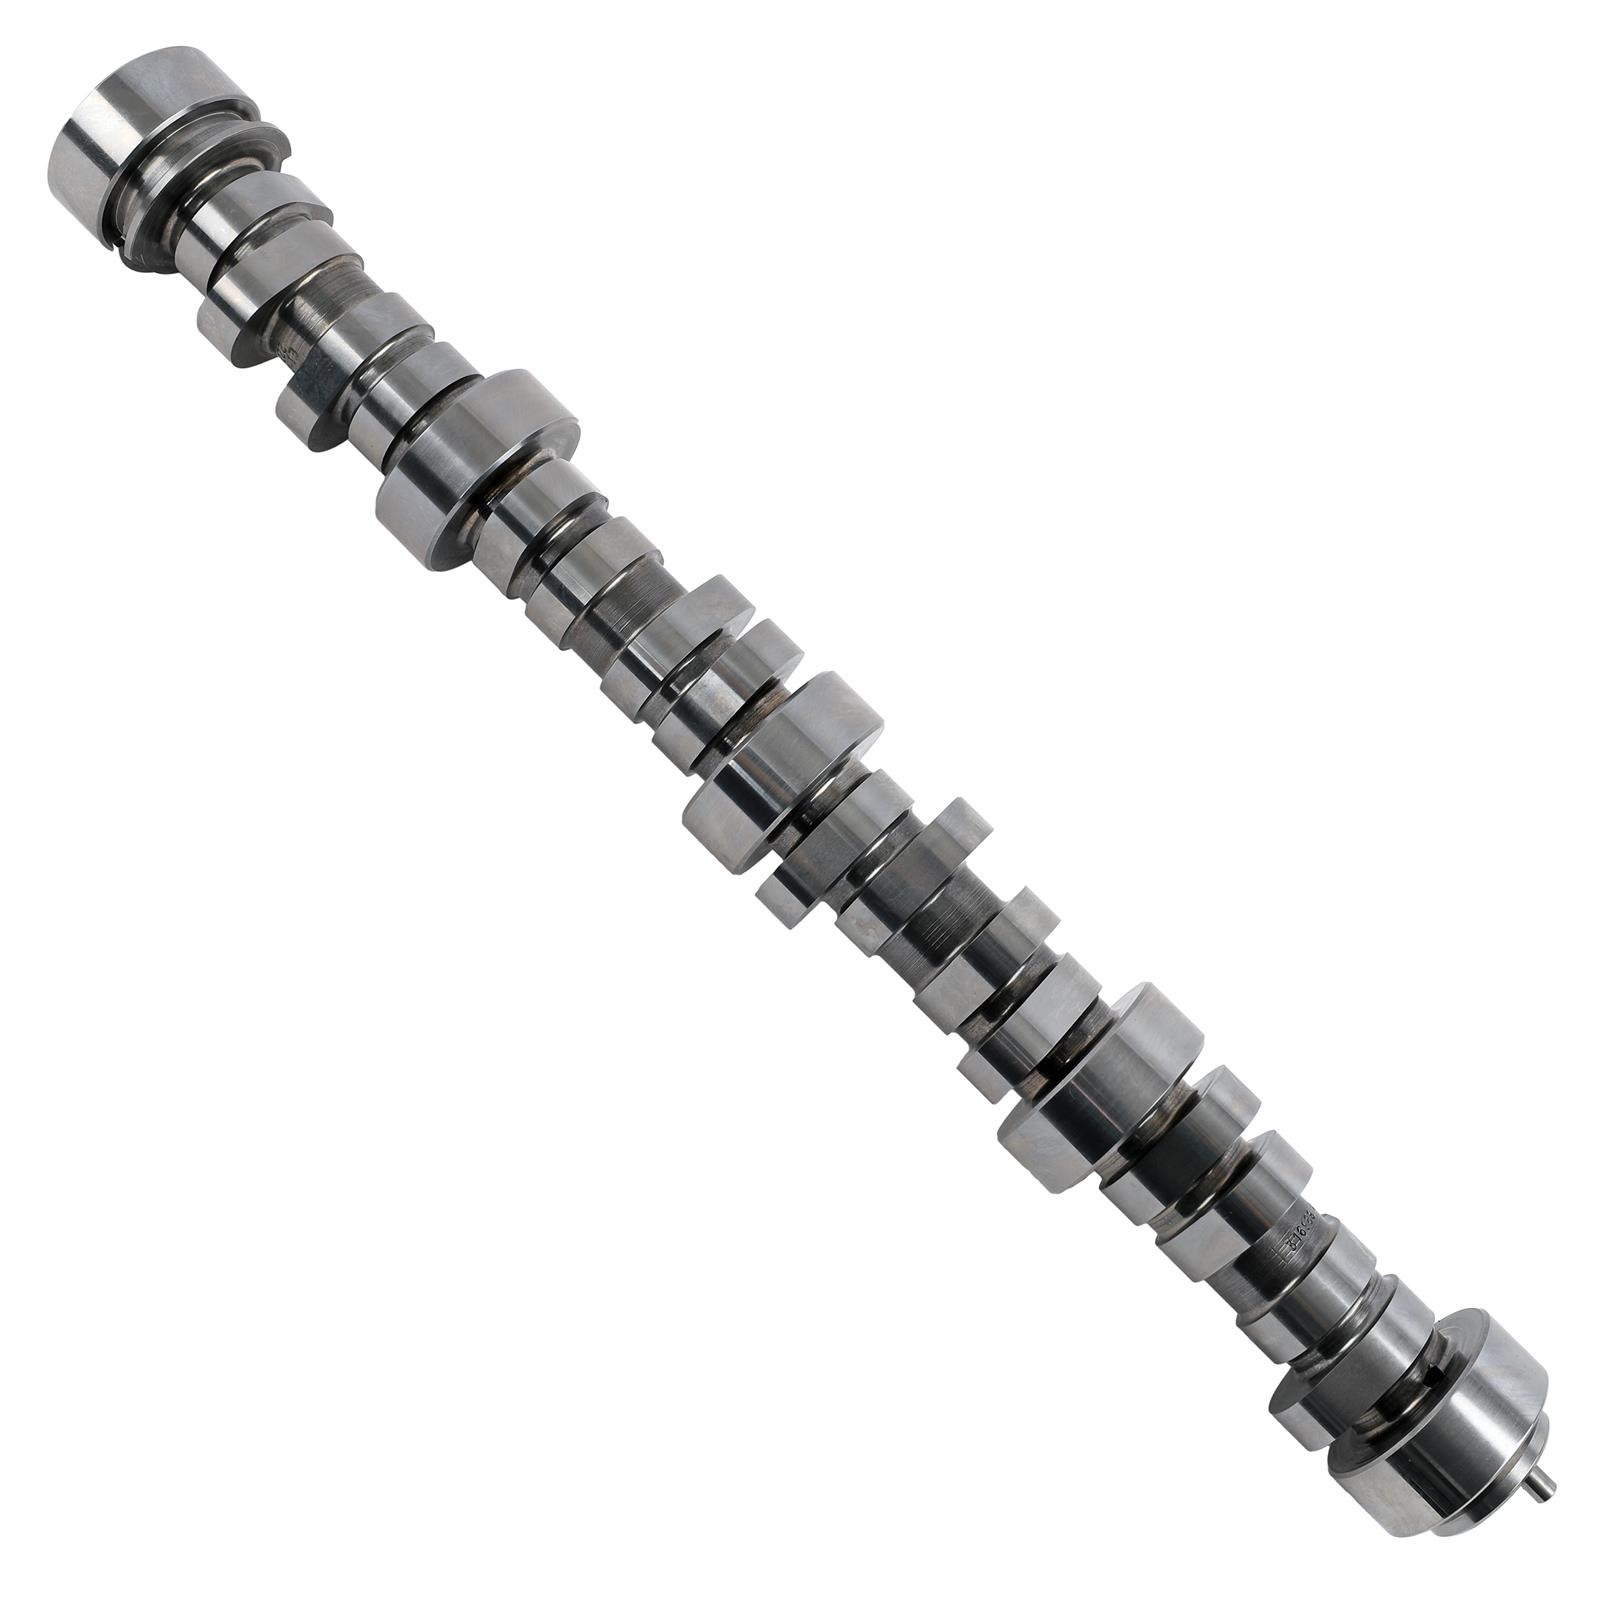 COMP Cams 54-477-11 COMP Cams LSR Series Hydraulic Roller Camshafts |  Summit Racing